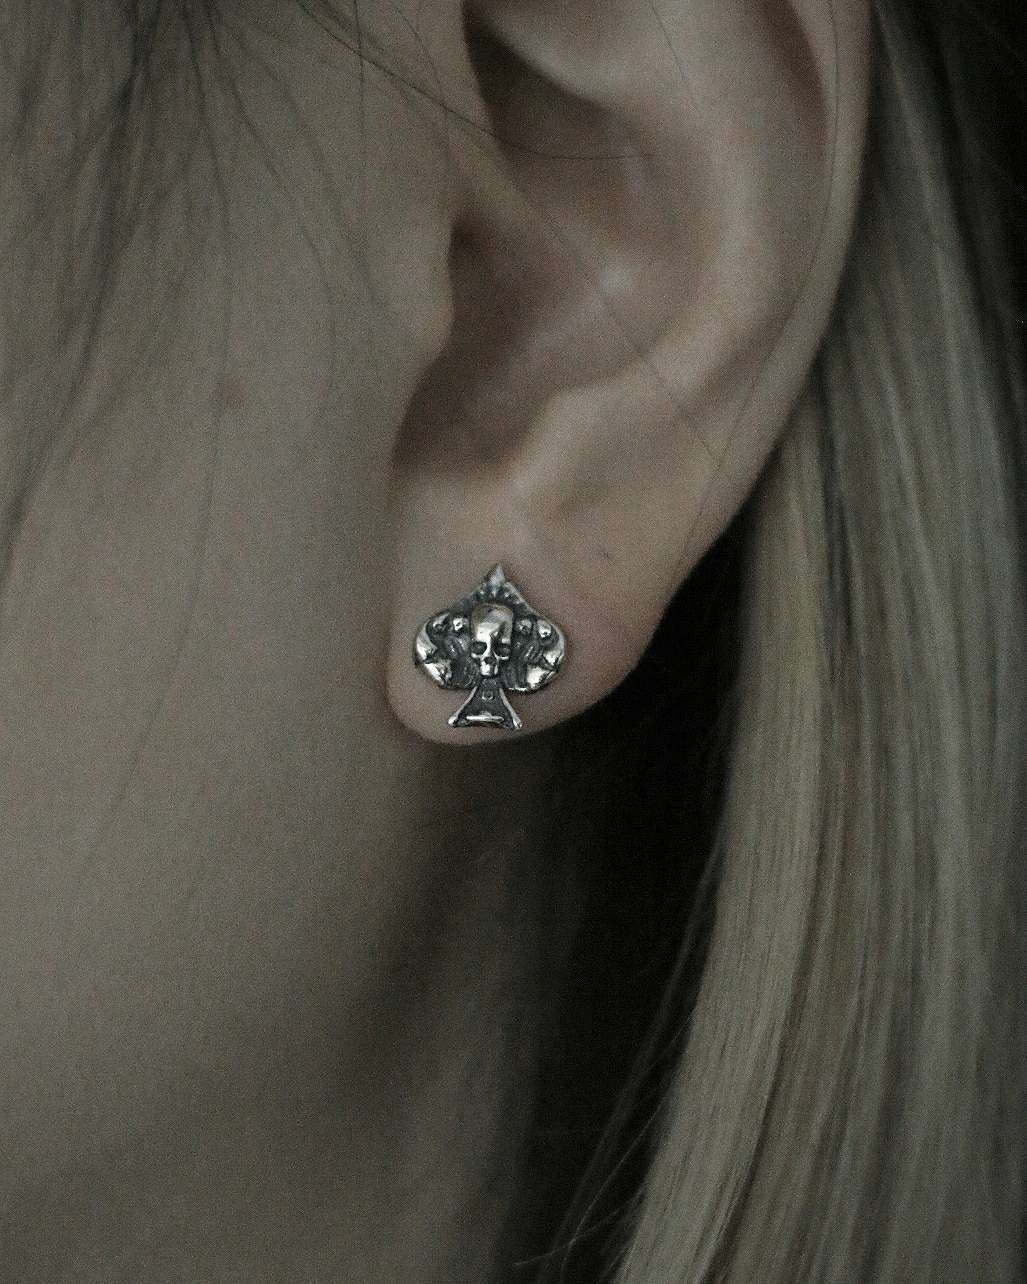 Monora Gothic *Spade Skull* Silver Stud Earring